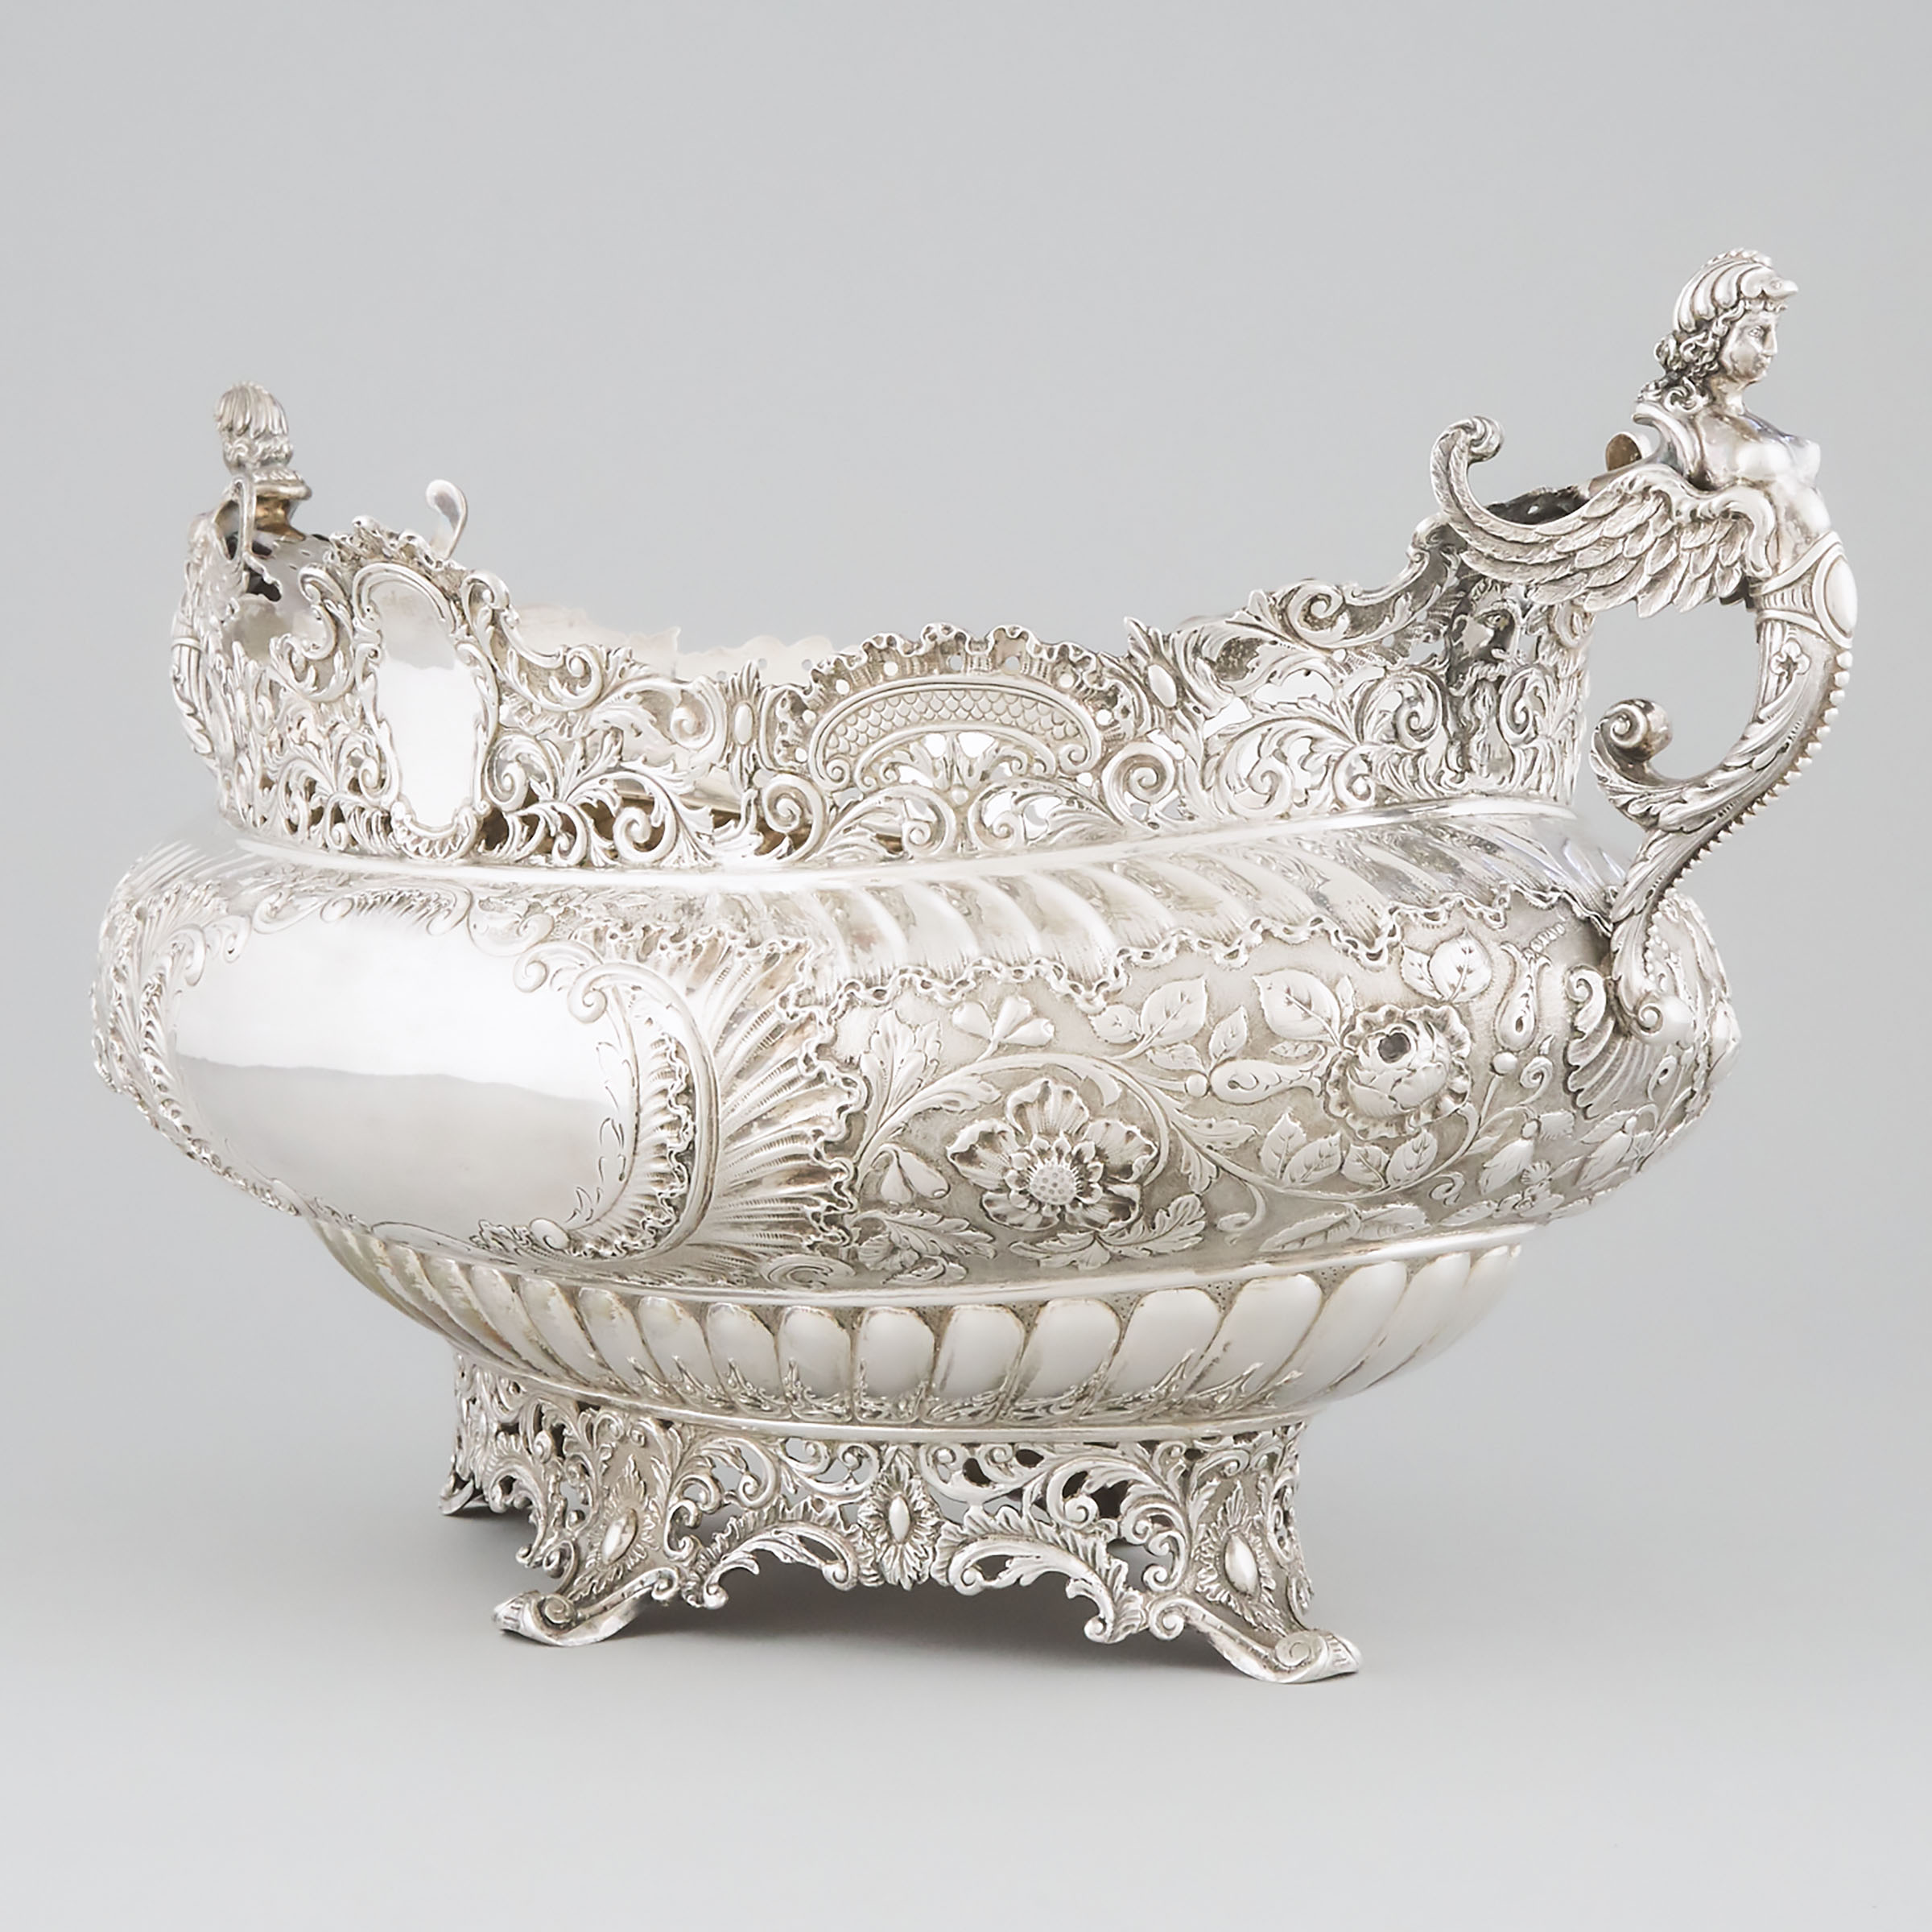 Late Victorian Scottish Silver Two-Handled Oval Centrepiece, George Edward & Sons, Glasgow, 1897